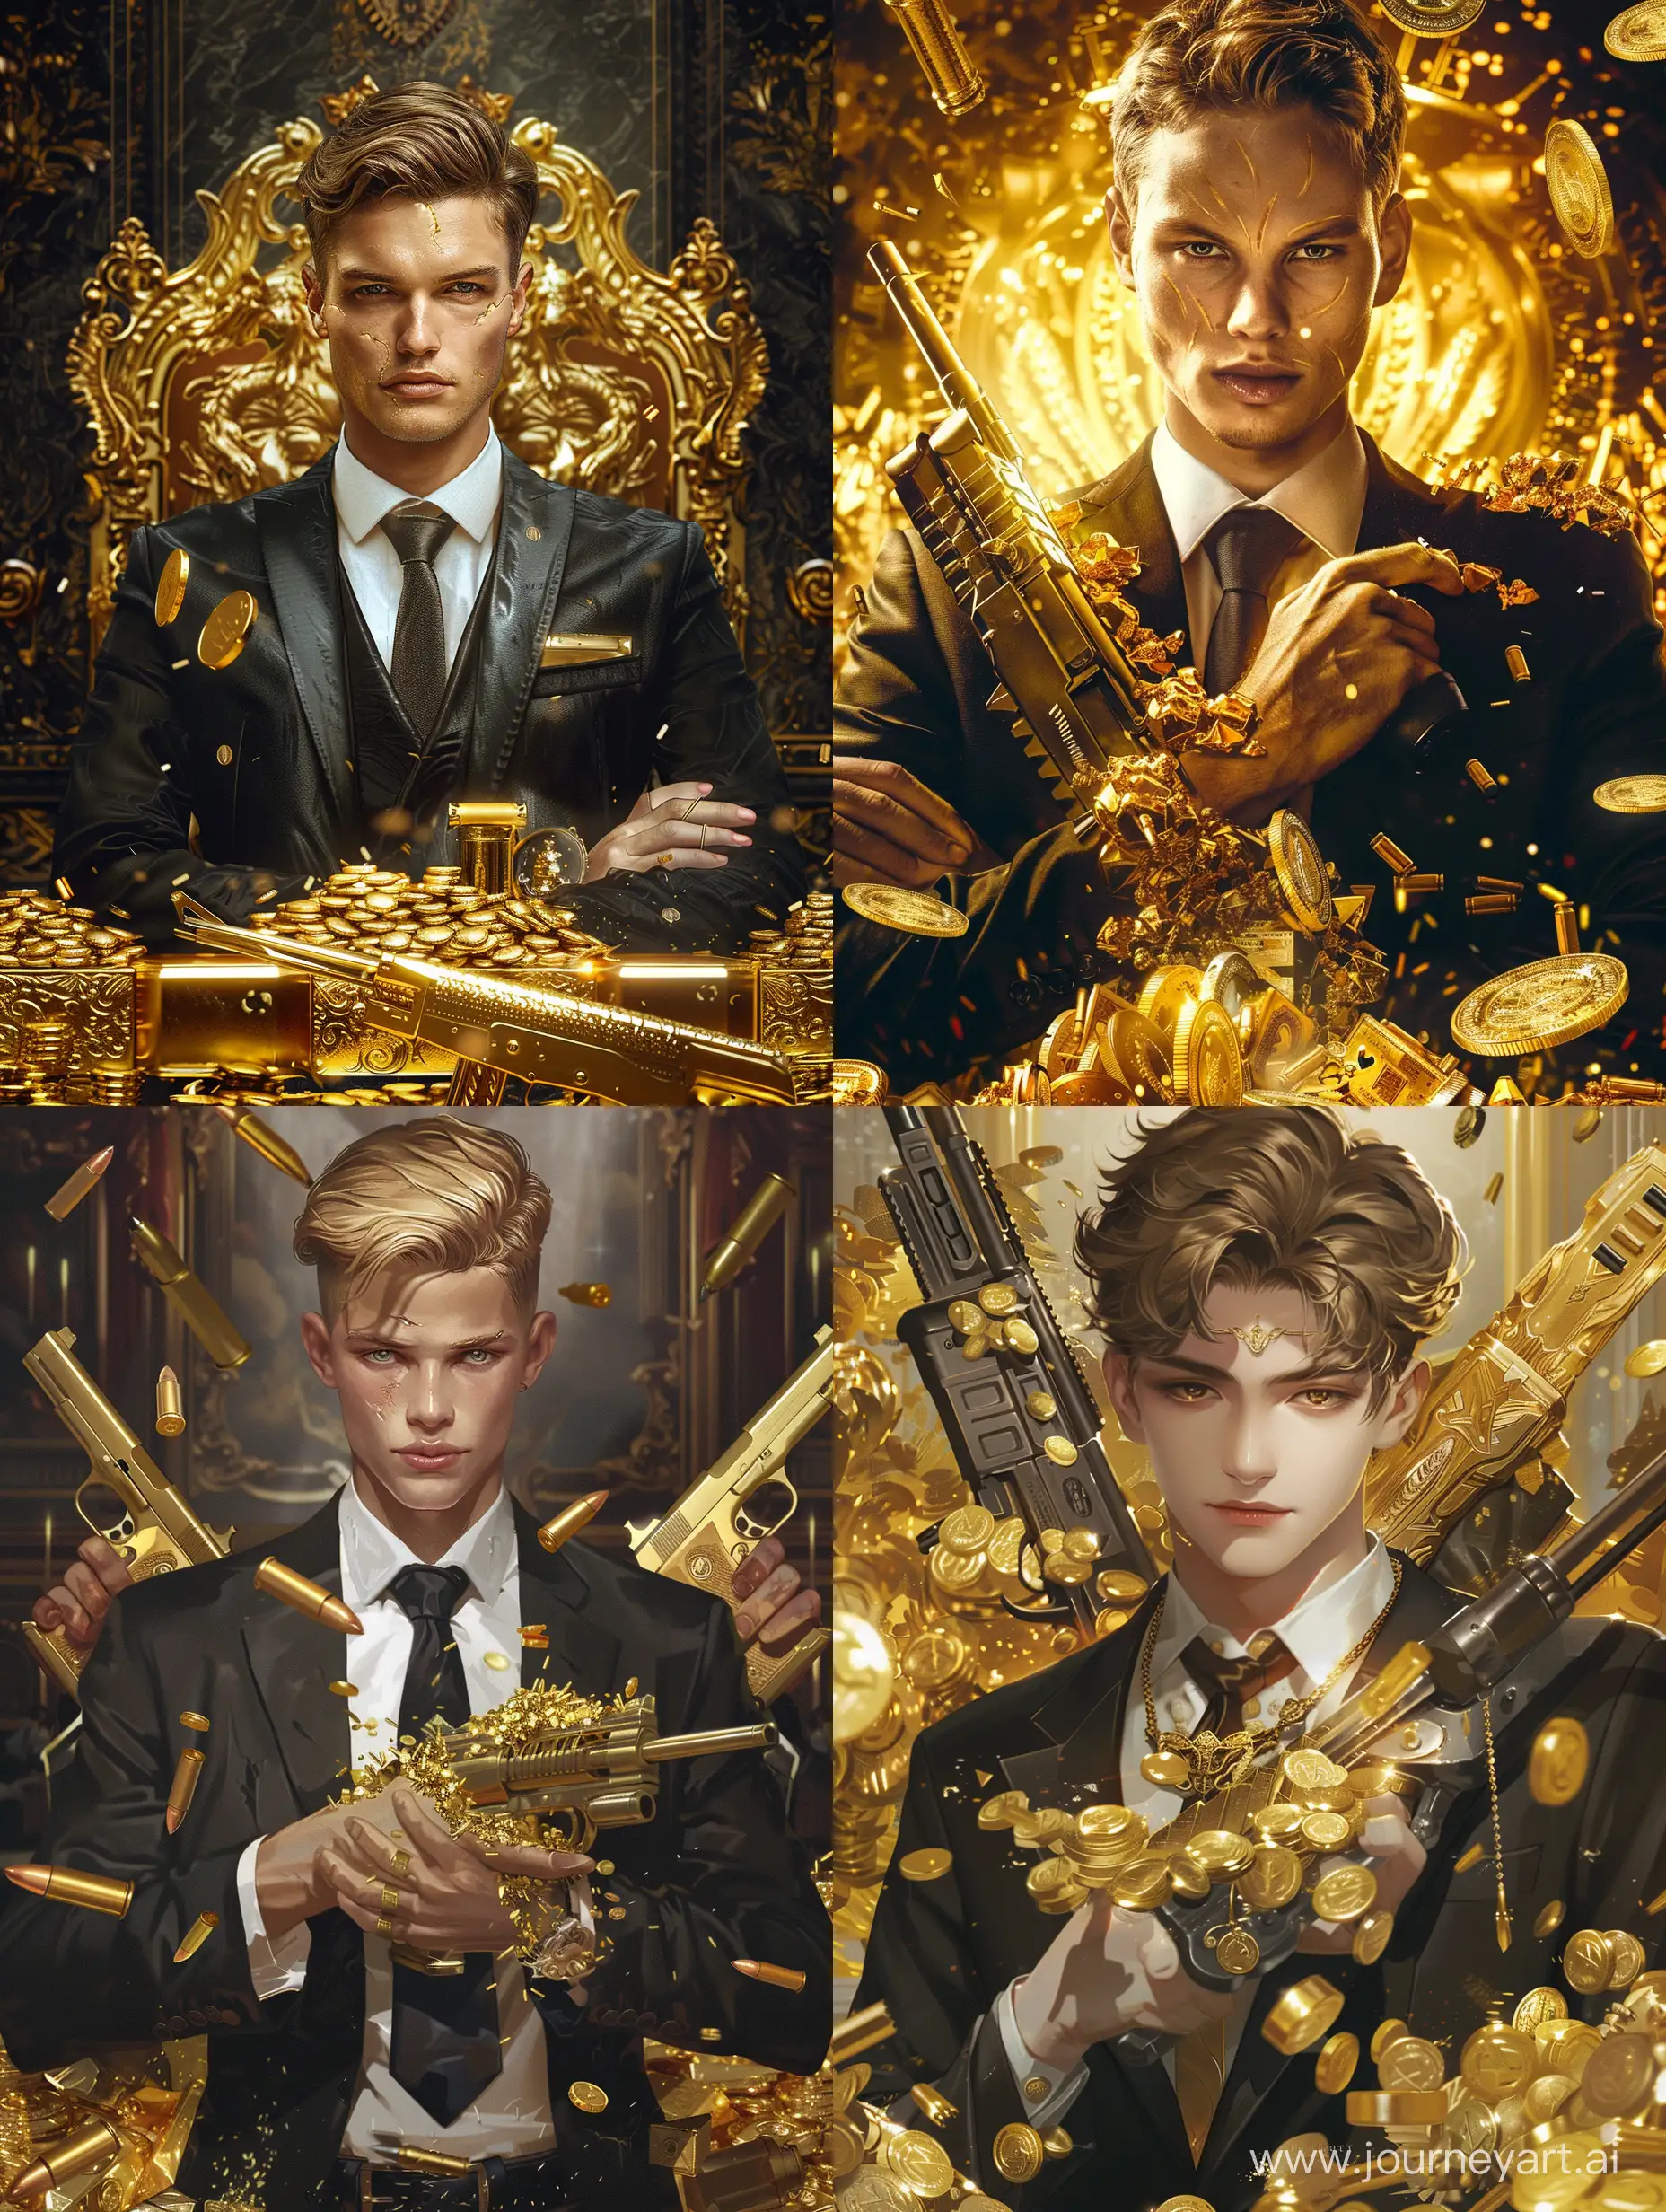 Luxurious-Young-Tycoon-Elegant-Boy-with-Gold-Accents-and-Weapons